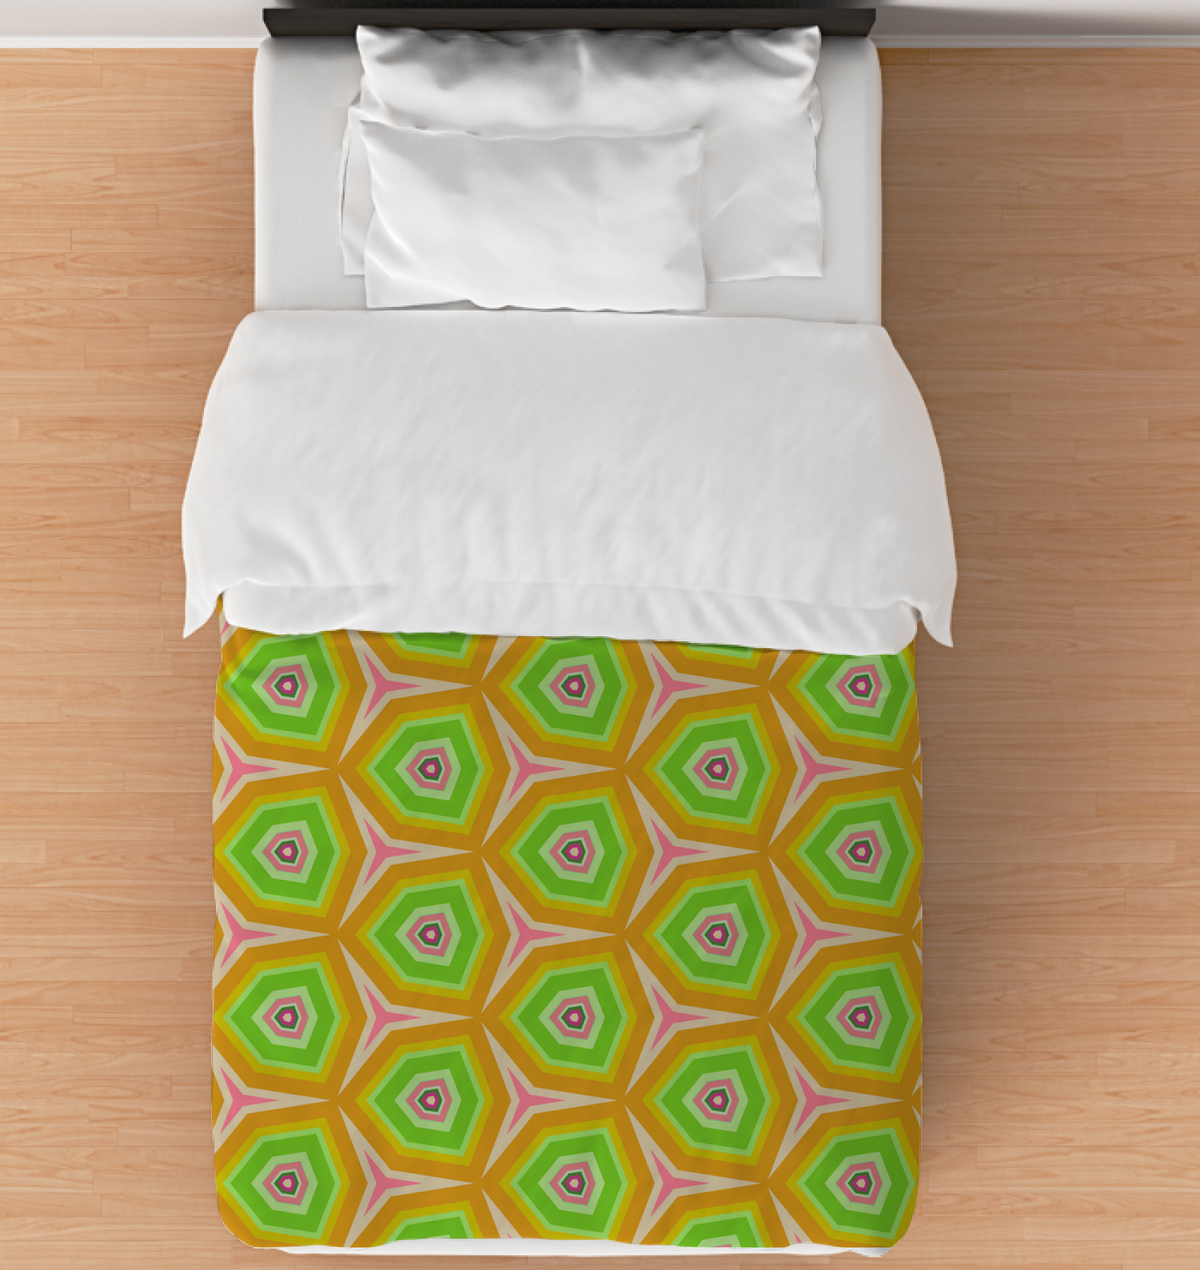 Colorful Nature's Palette Duvet Cover in a modern bedroom setting.